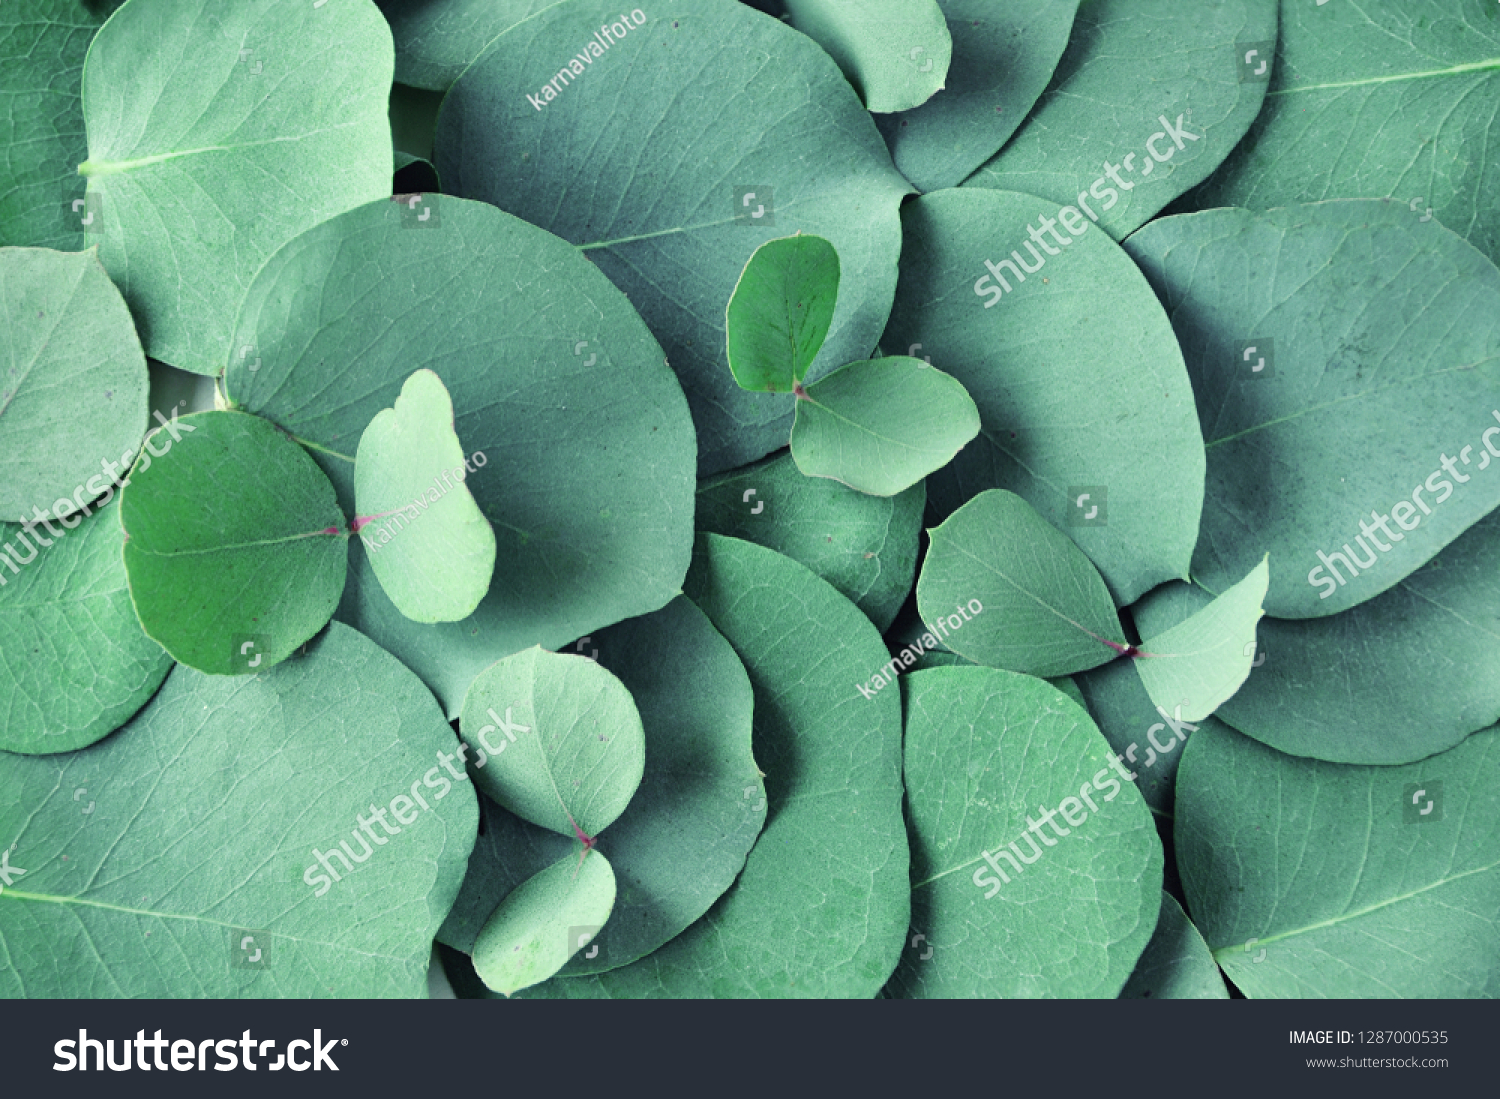 Fresh eucalyptus leaves. Flat lay, top view. Nature green Eucalyptus leaves  background  #1287000535